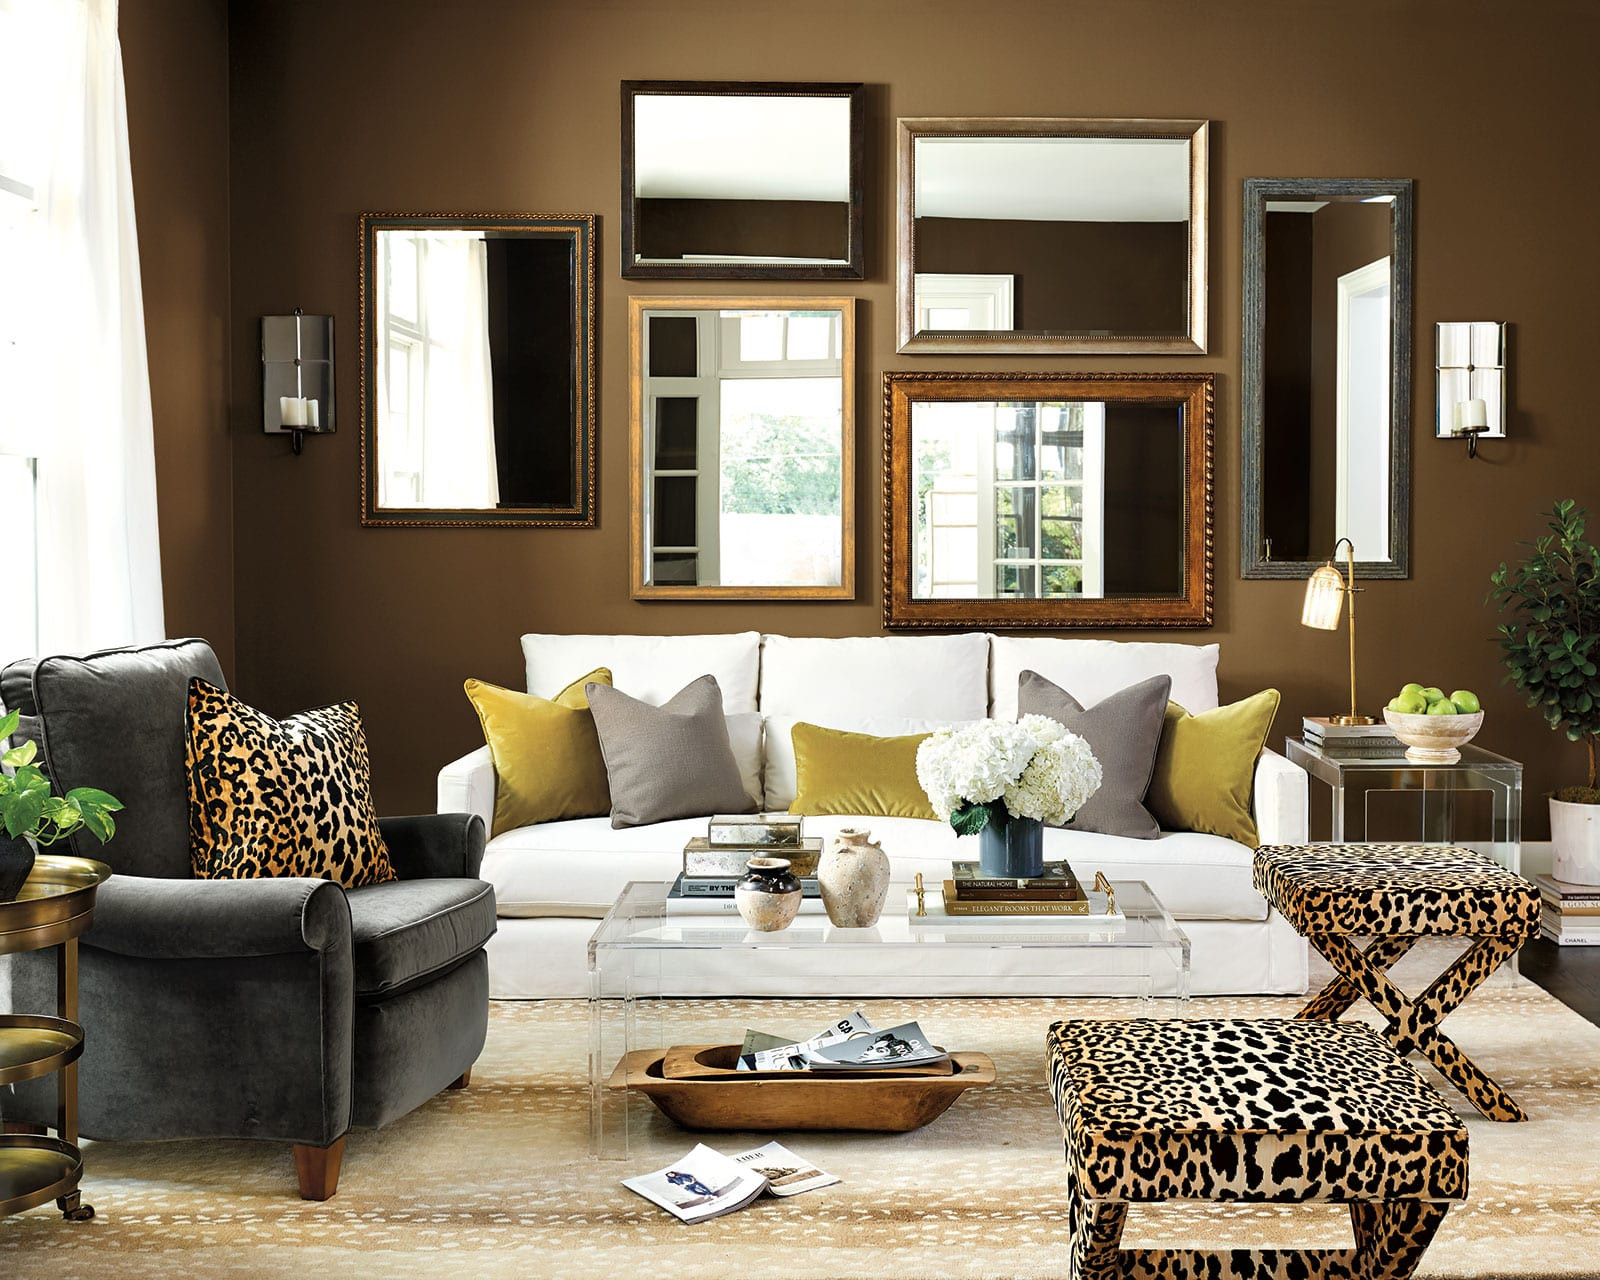 Brown Living Room Walls
 Dark Paint Color Inspiration for Your Room